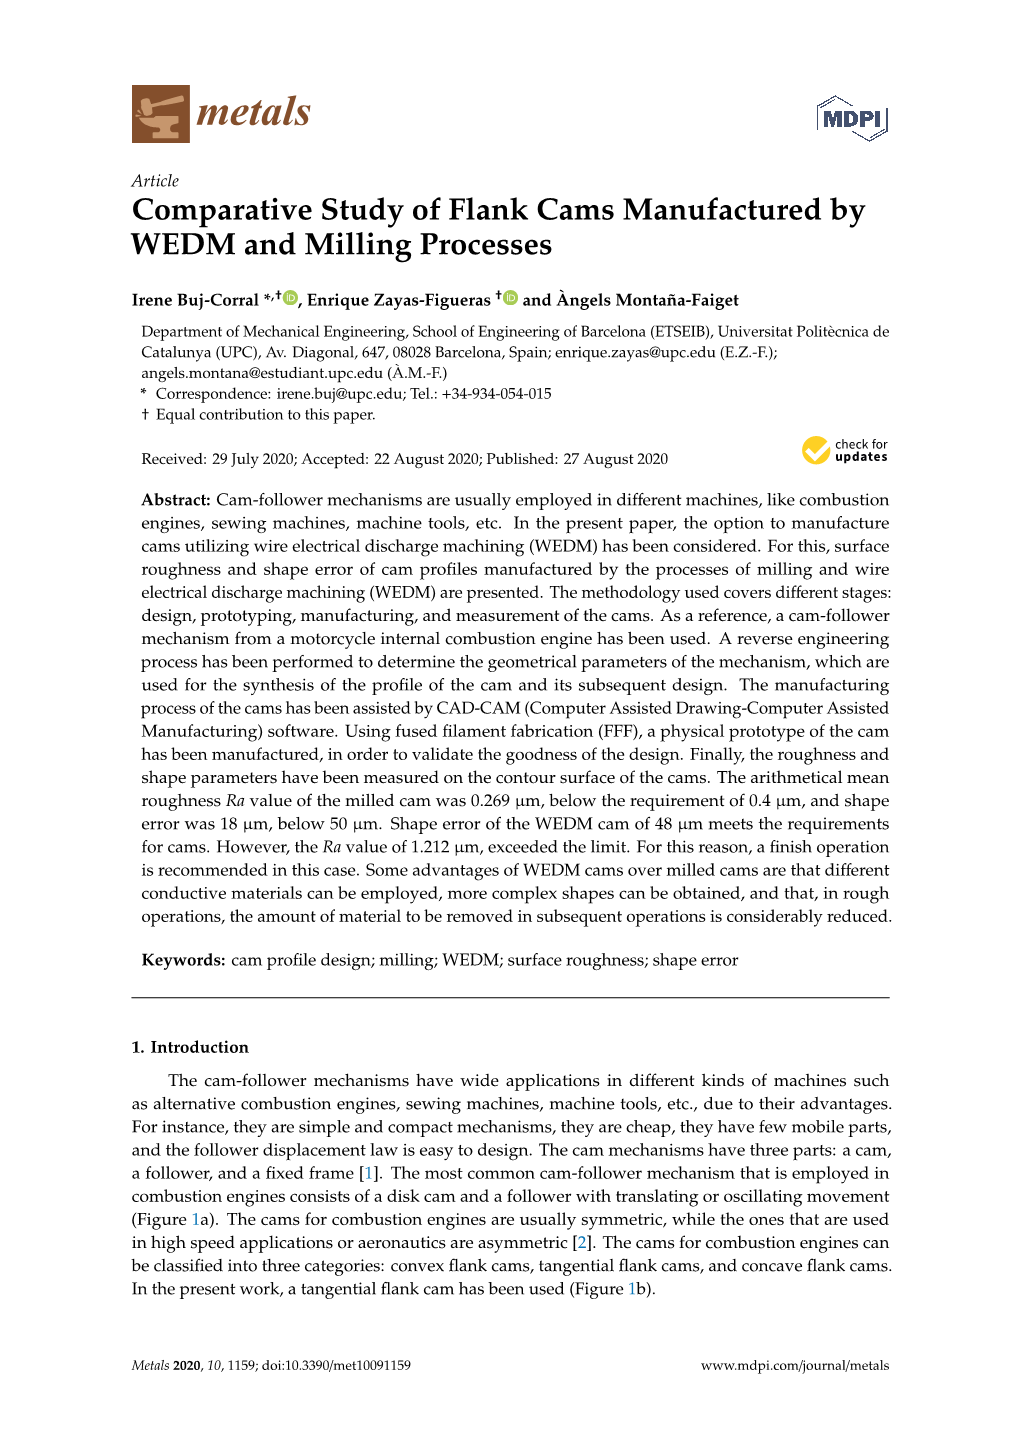 Comparative Study of Flank Cams Manufactured by WEDM and Milling Processes